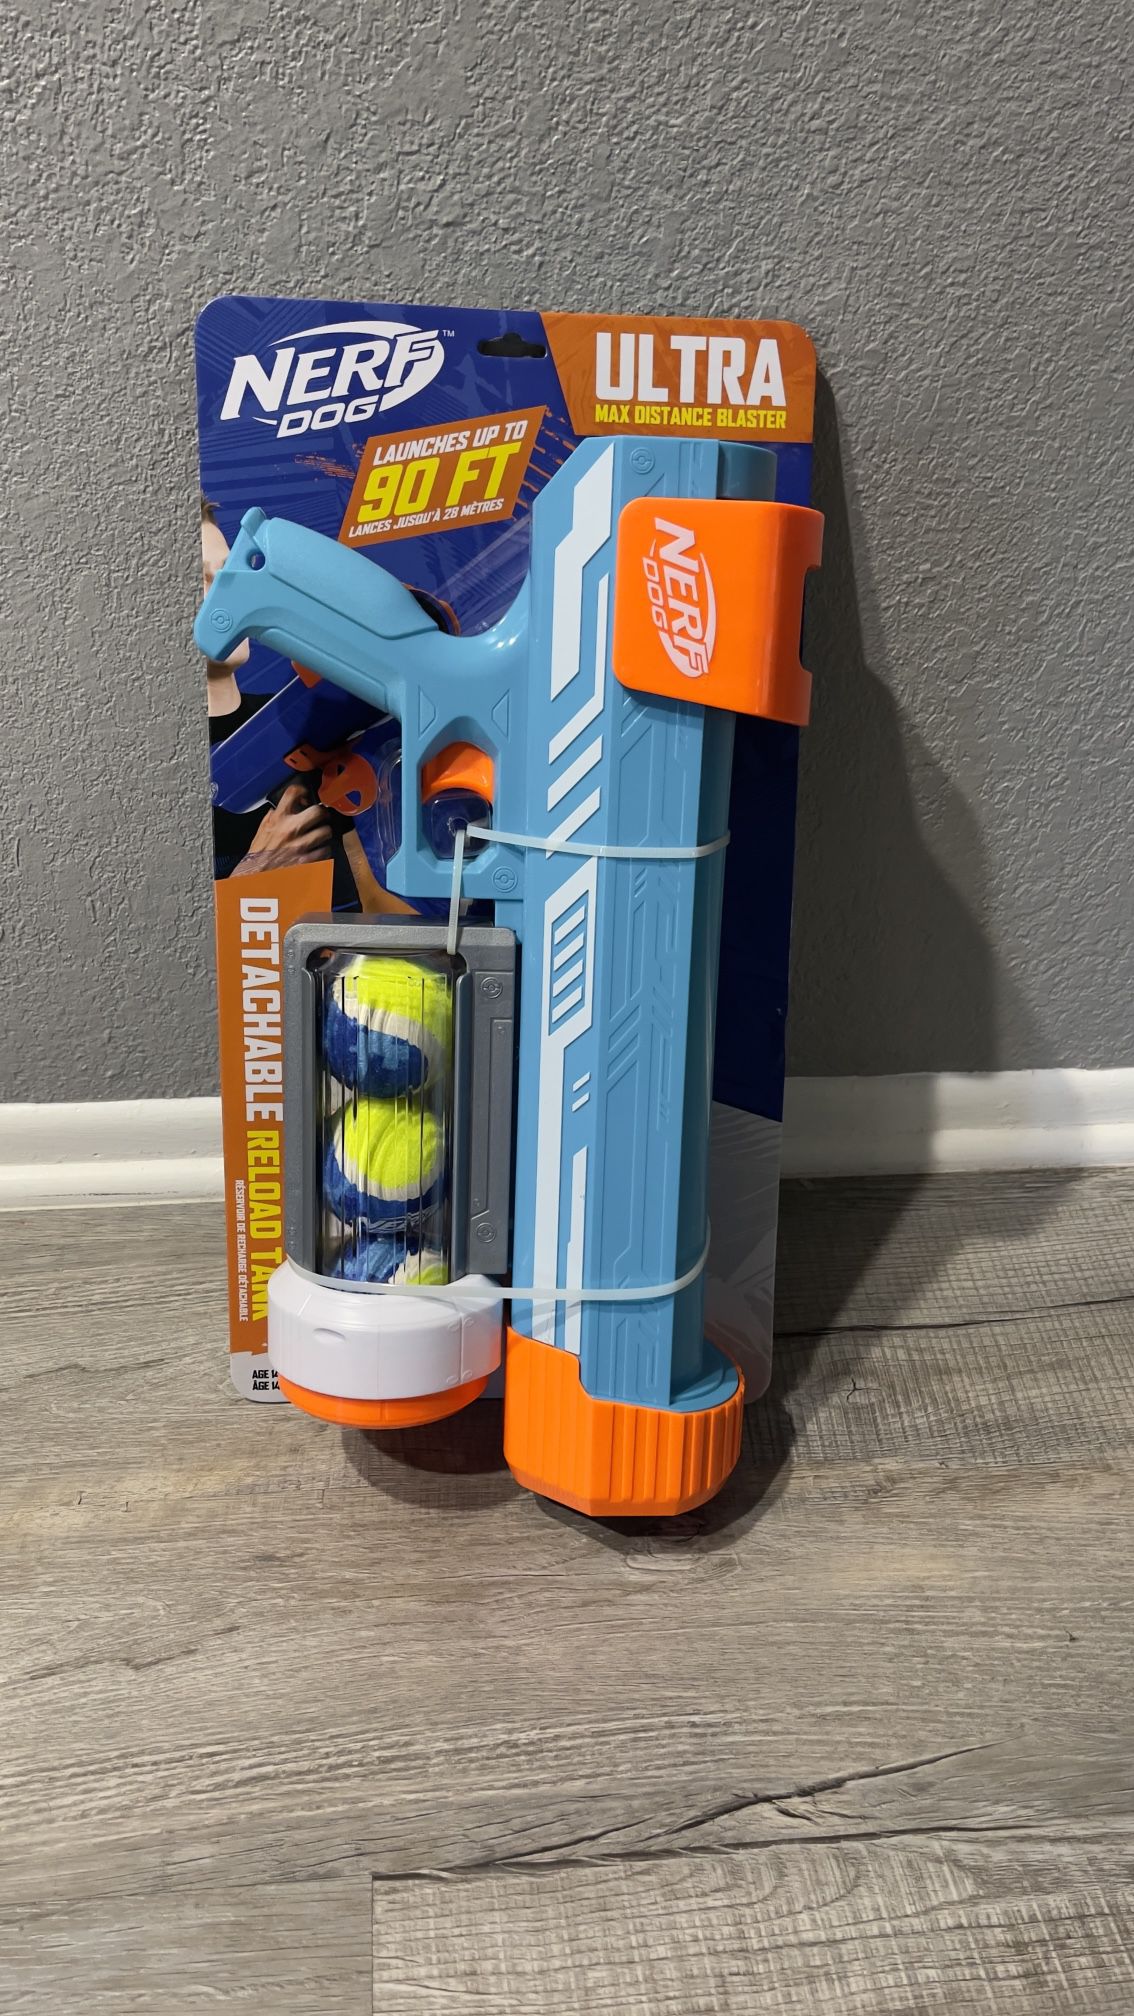 Nerf Dog Ultra Max Distance Tennis Ball Blaster Dog Toy - 3 Pack of Balls